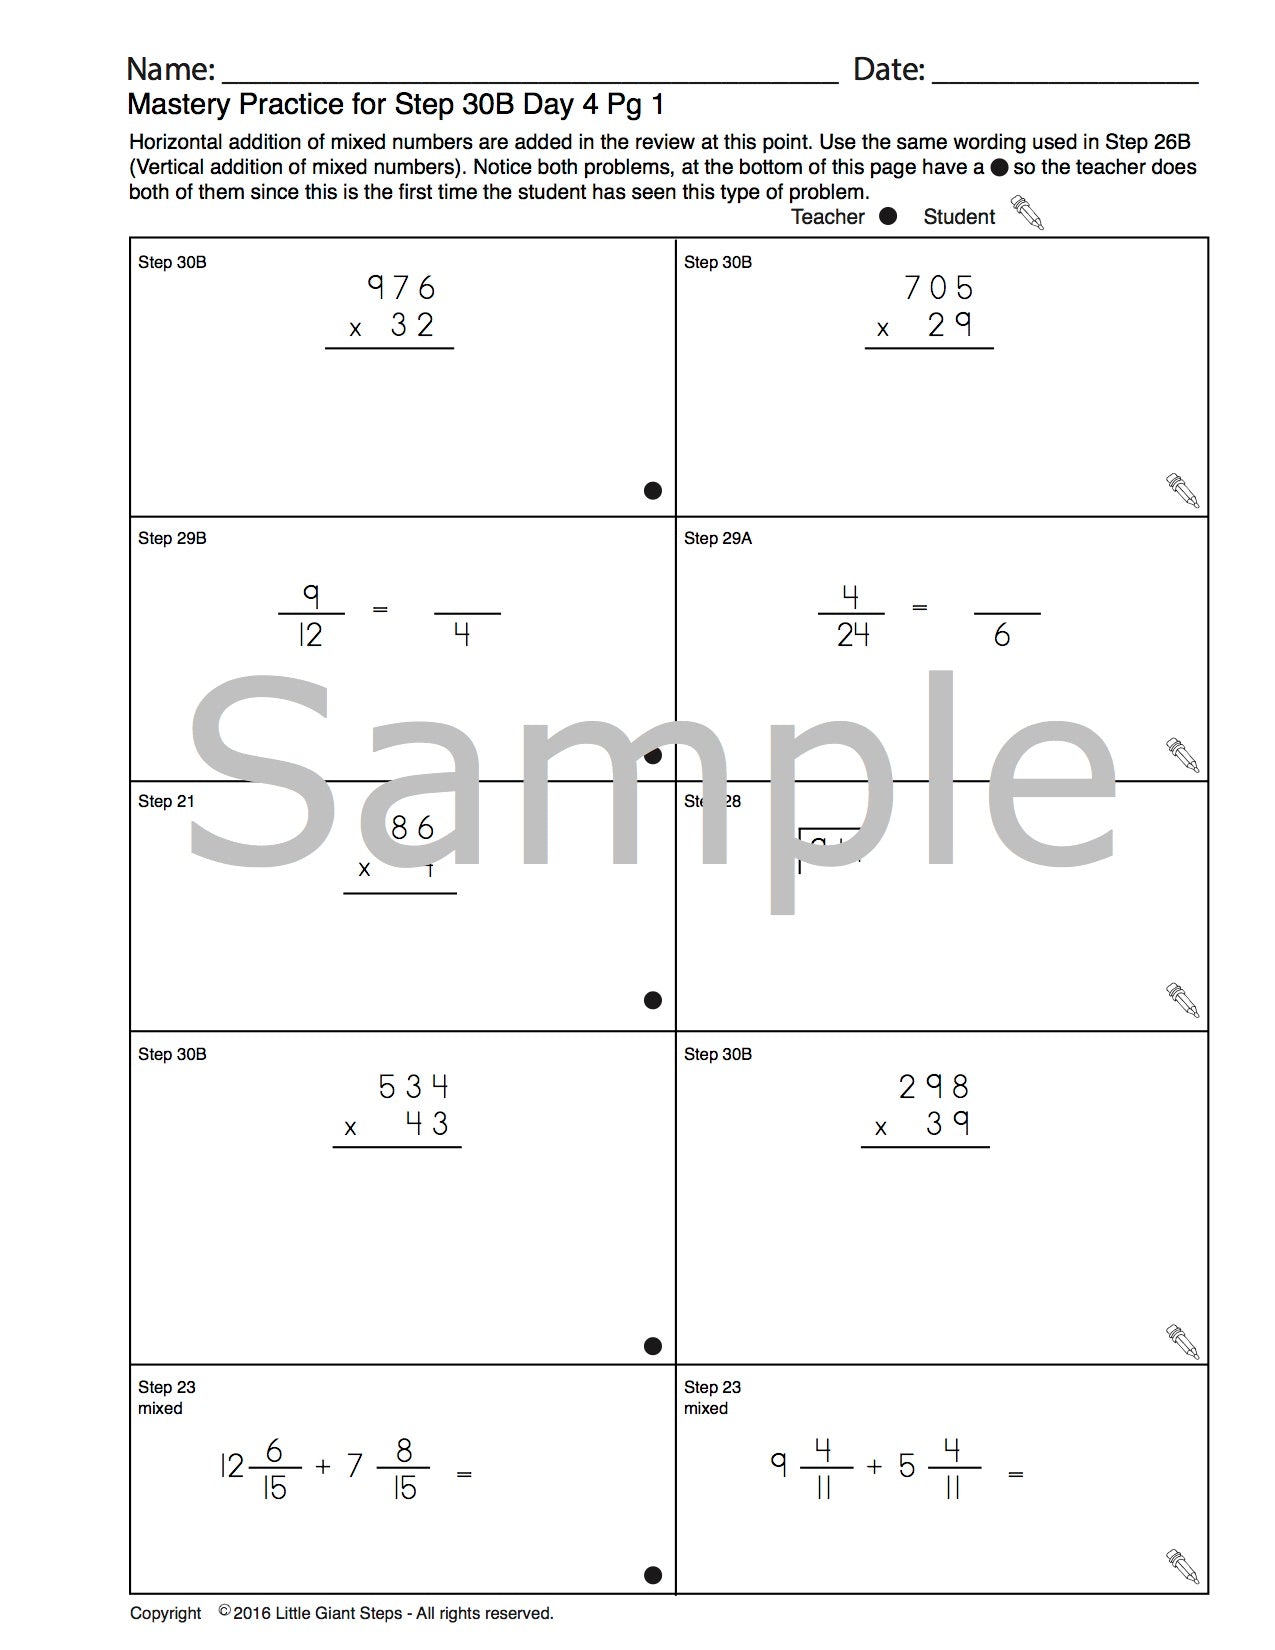 Visual Circle Math – Additional Mastery Practice Pages Download Only